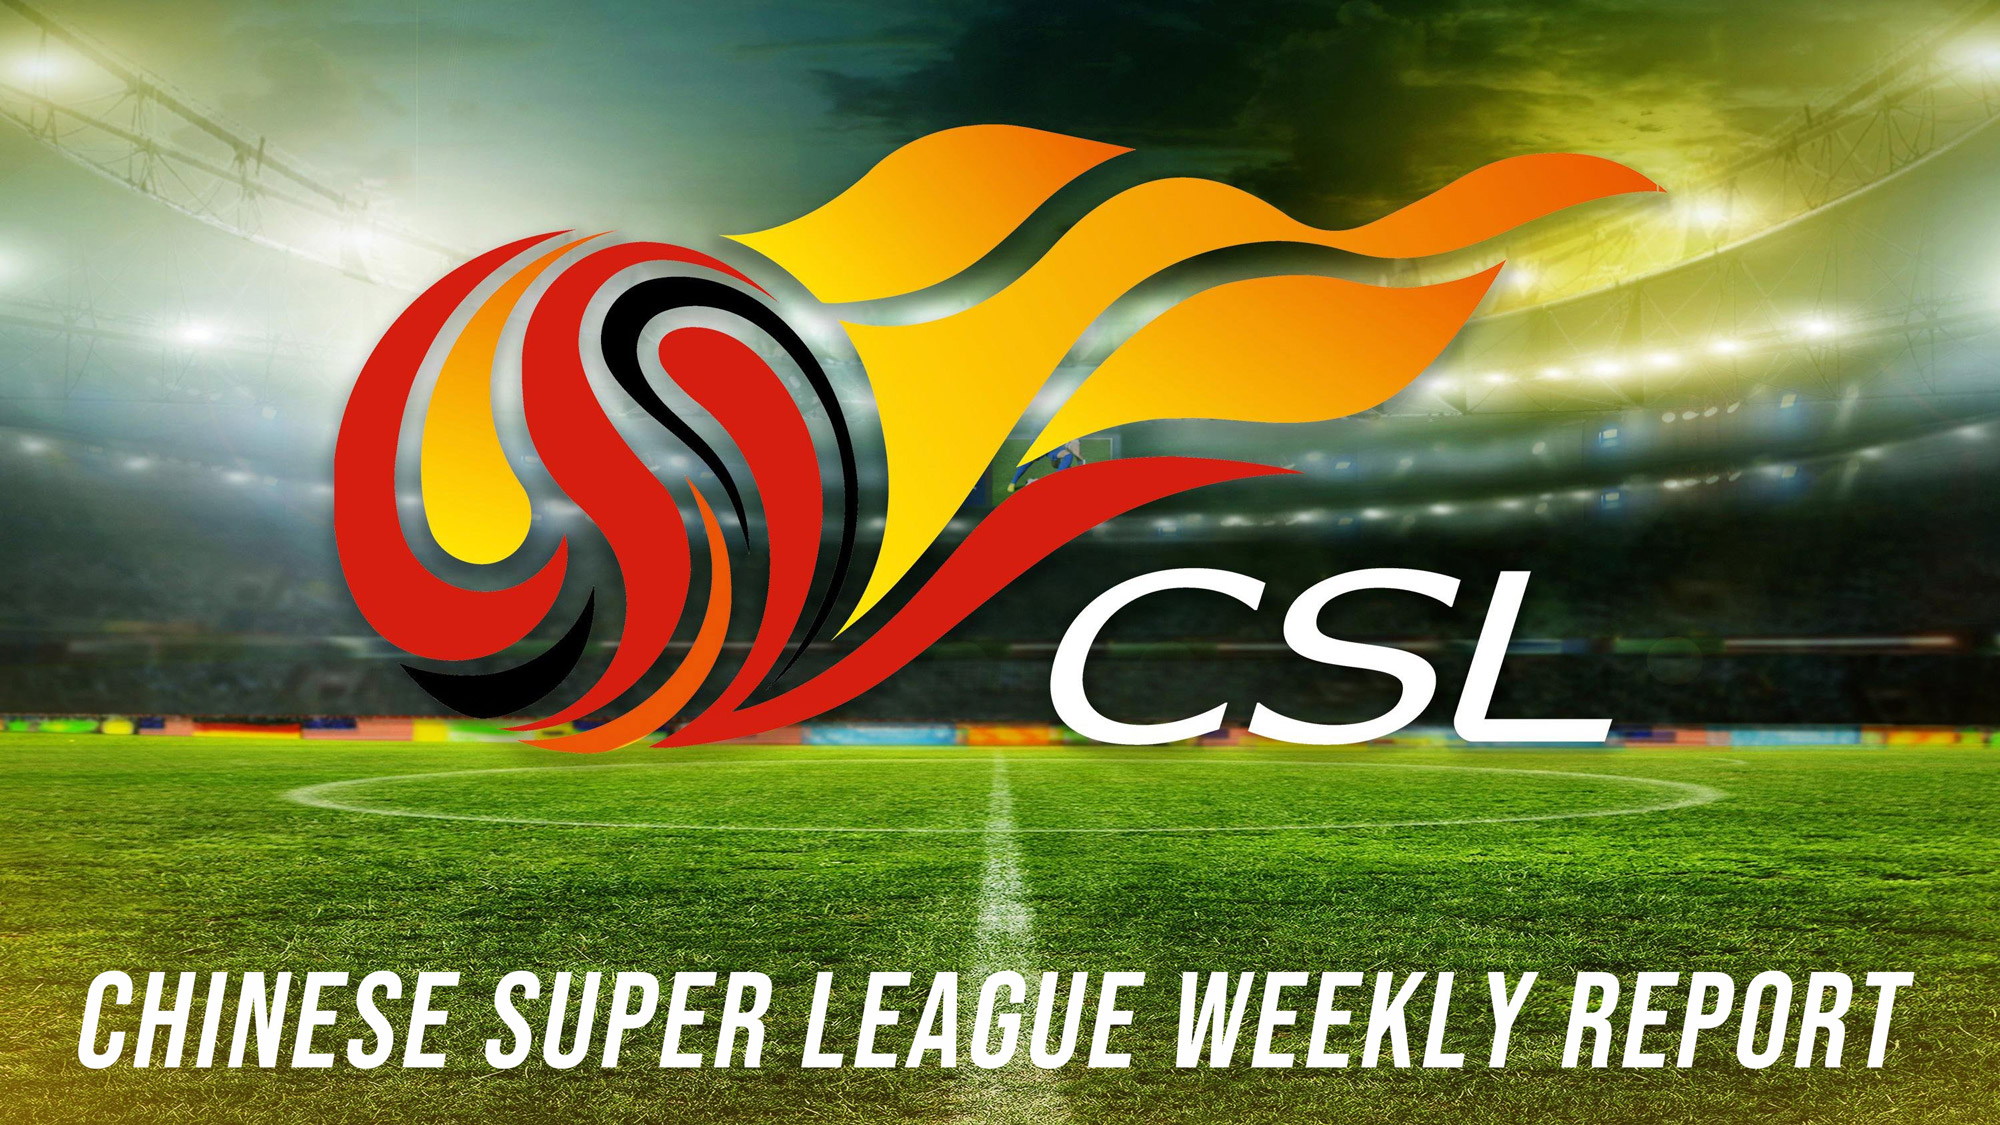 Chinese Super League 2019 Weekly: Arrivals of Arnautovic and El Shaarawy, Mourinho snubs Guangzhou